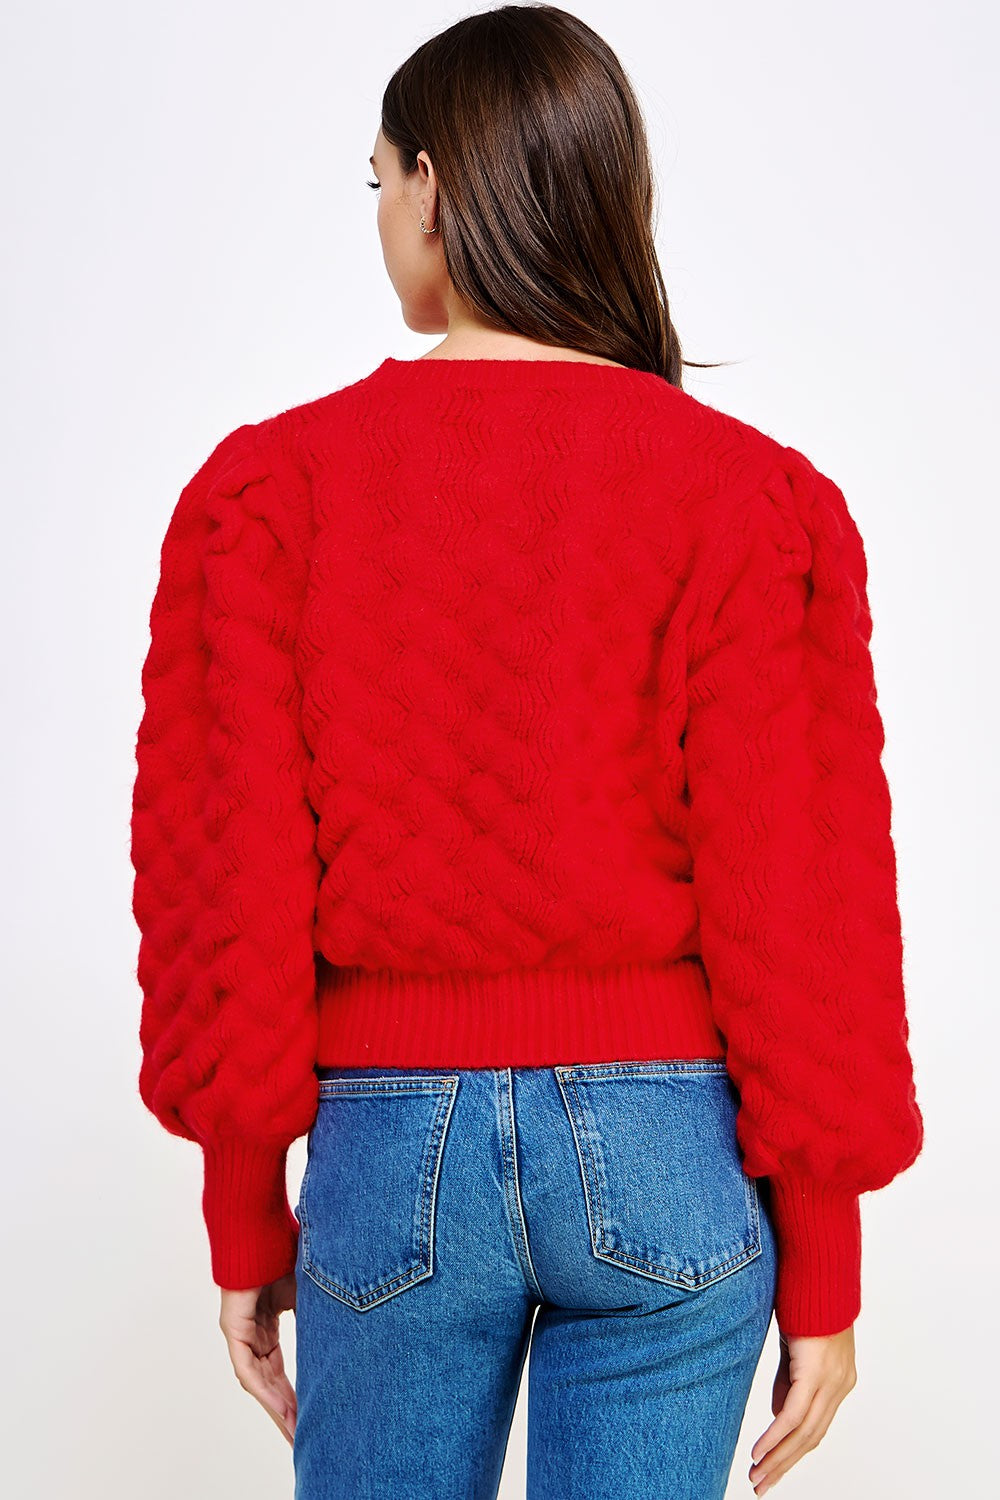 TEXTURED WAVE SWEATER IN RED